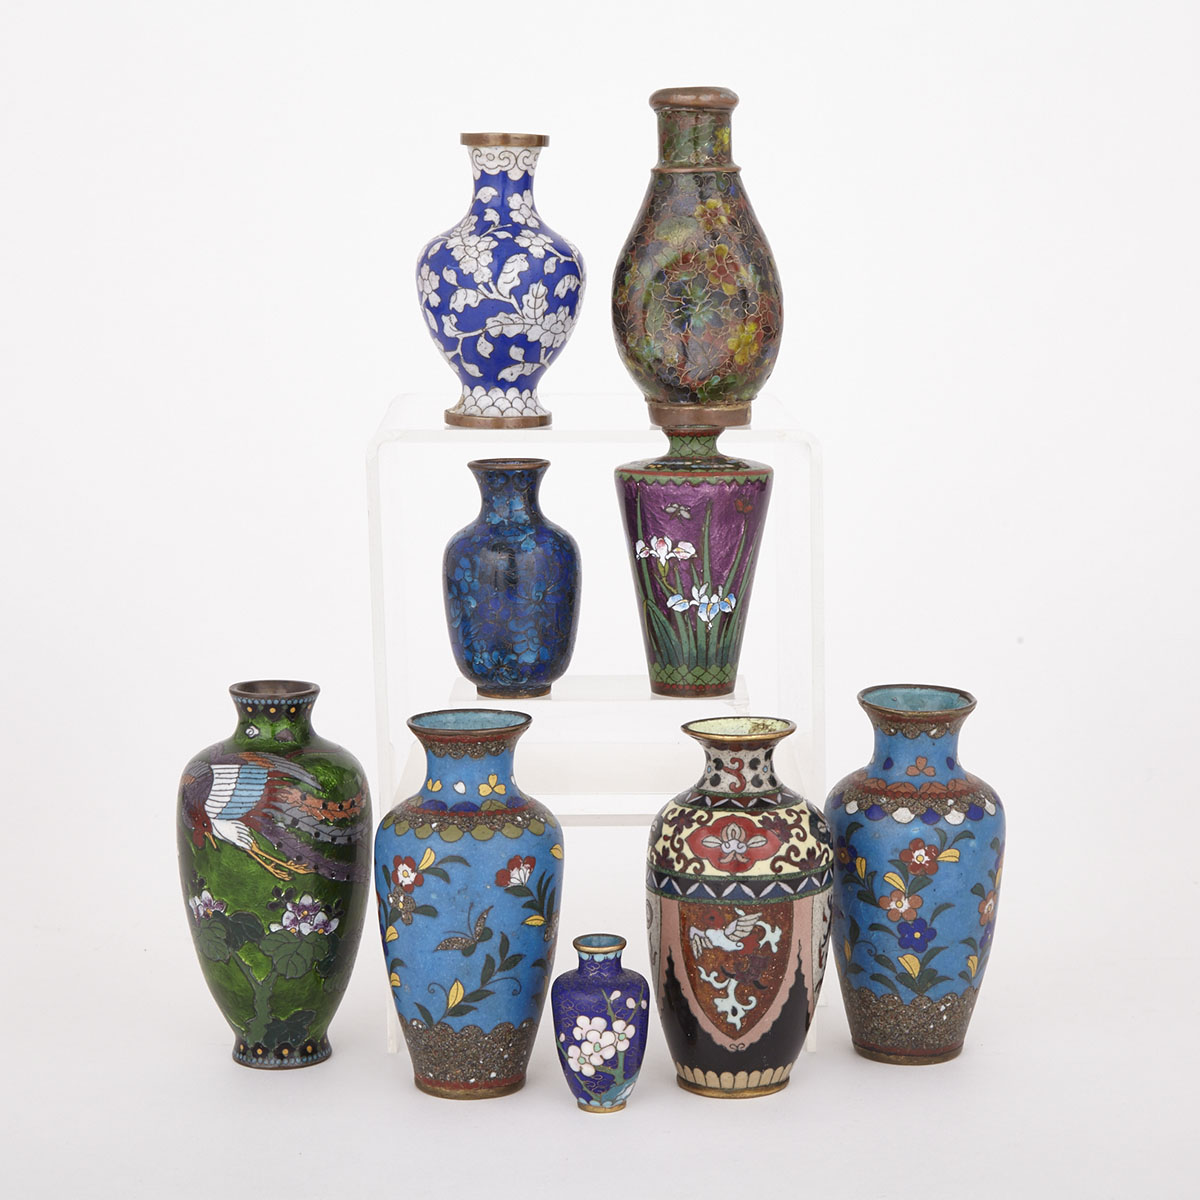 Group of Nine Japanese Cloisonne Vases, early 20th Century